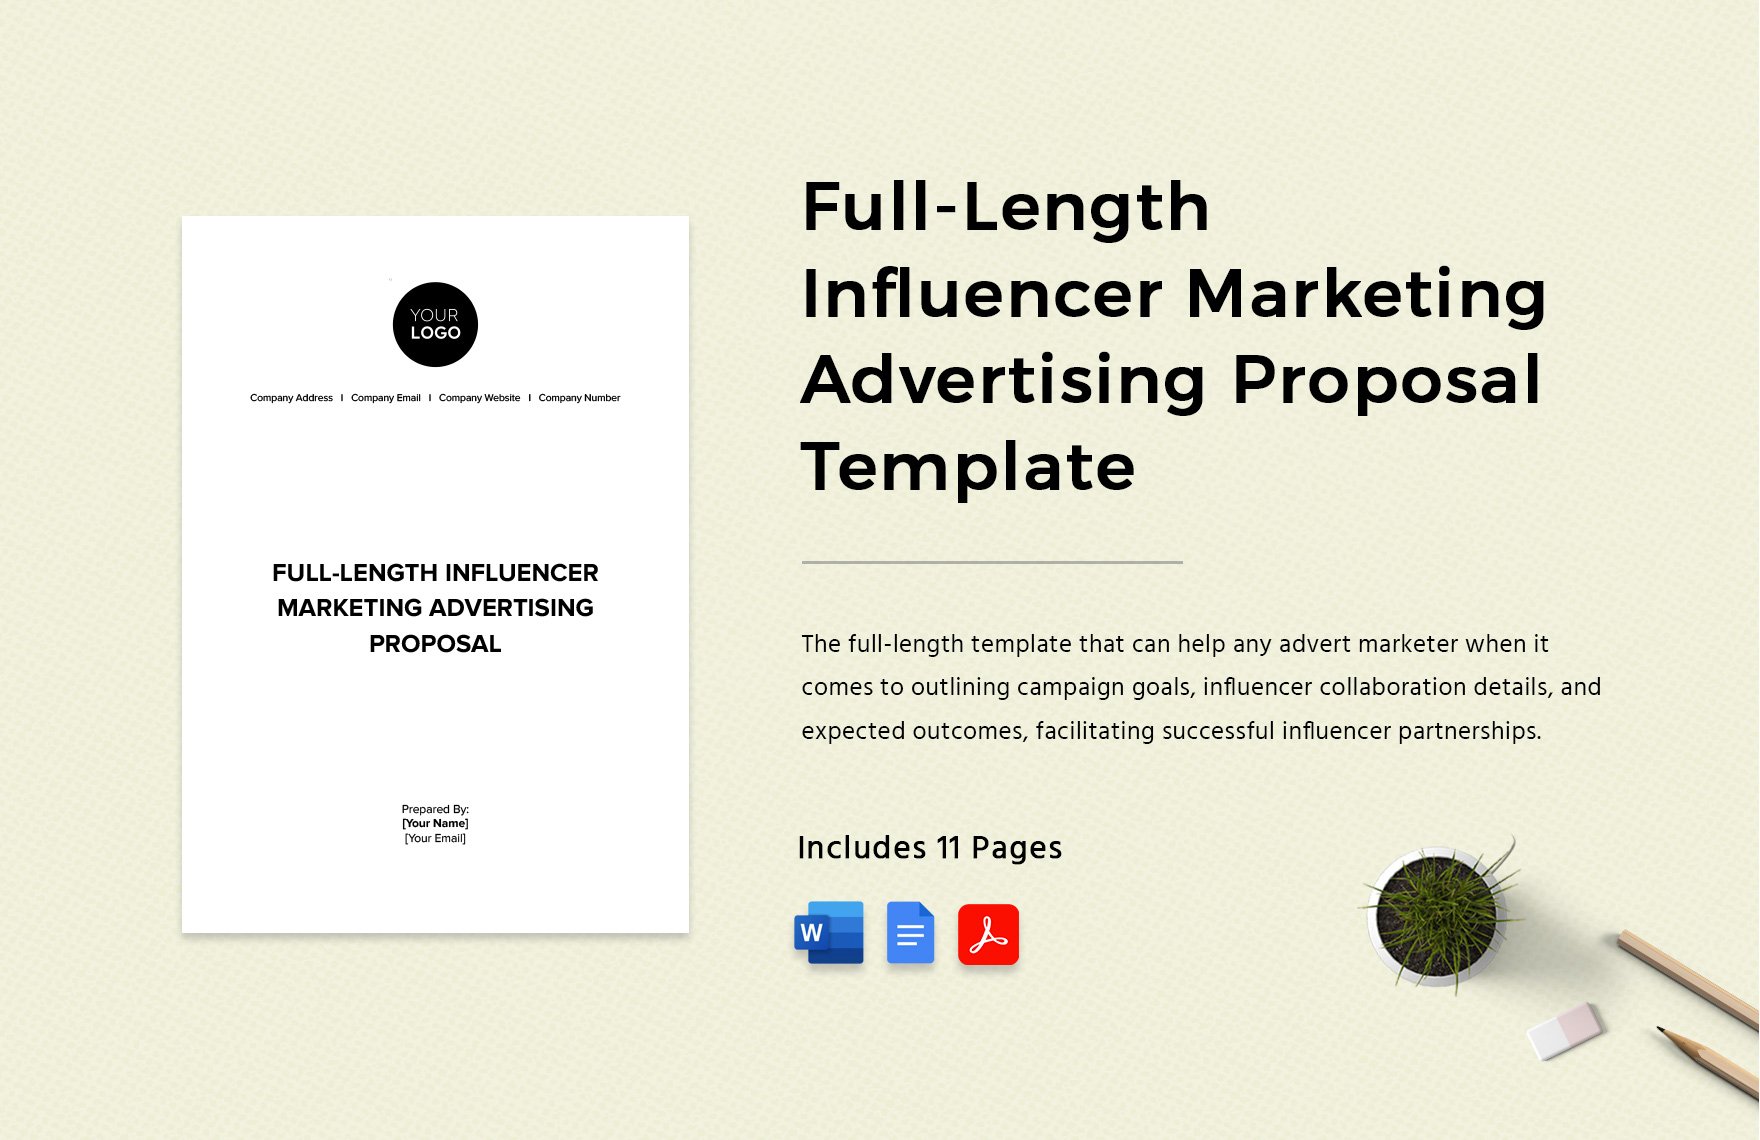 Full-Length Influencer Marketing Advertising Proposal Template in Word, Google Docs, PDF